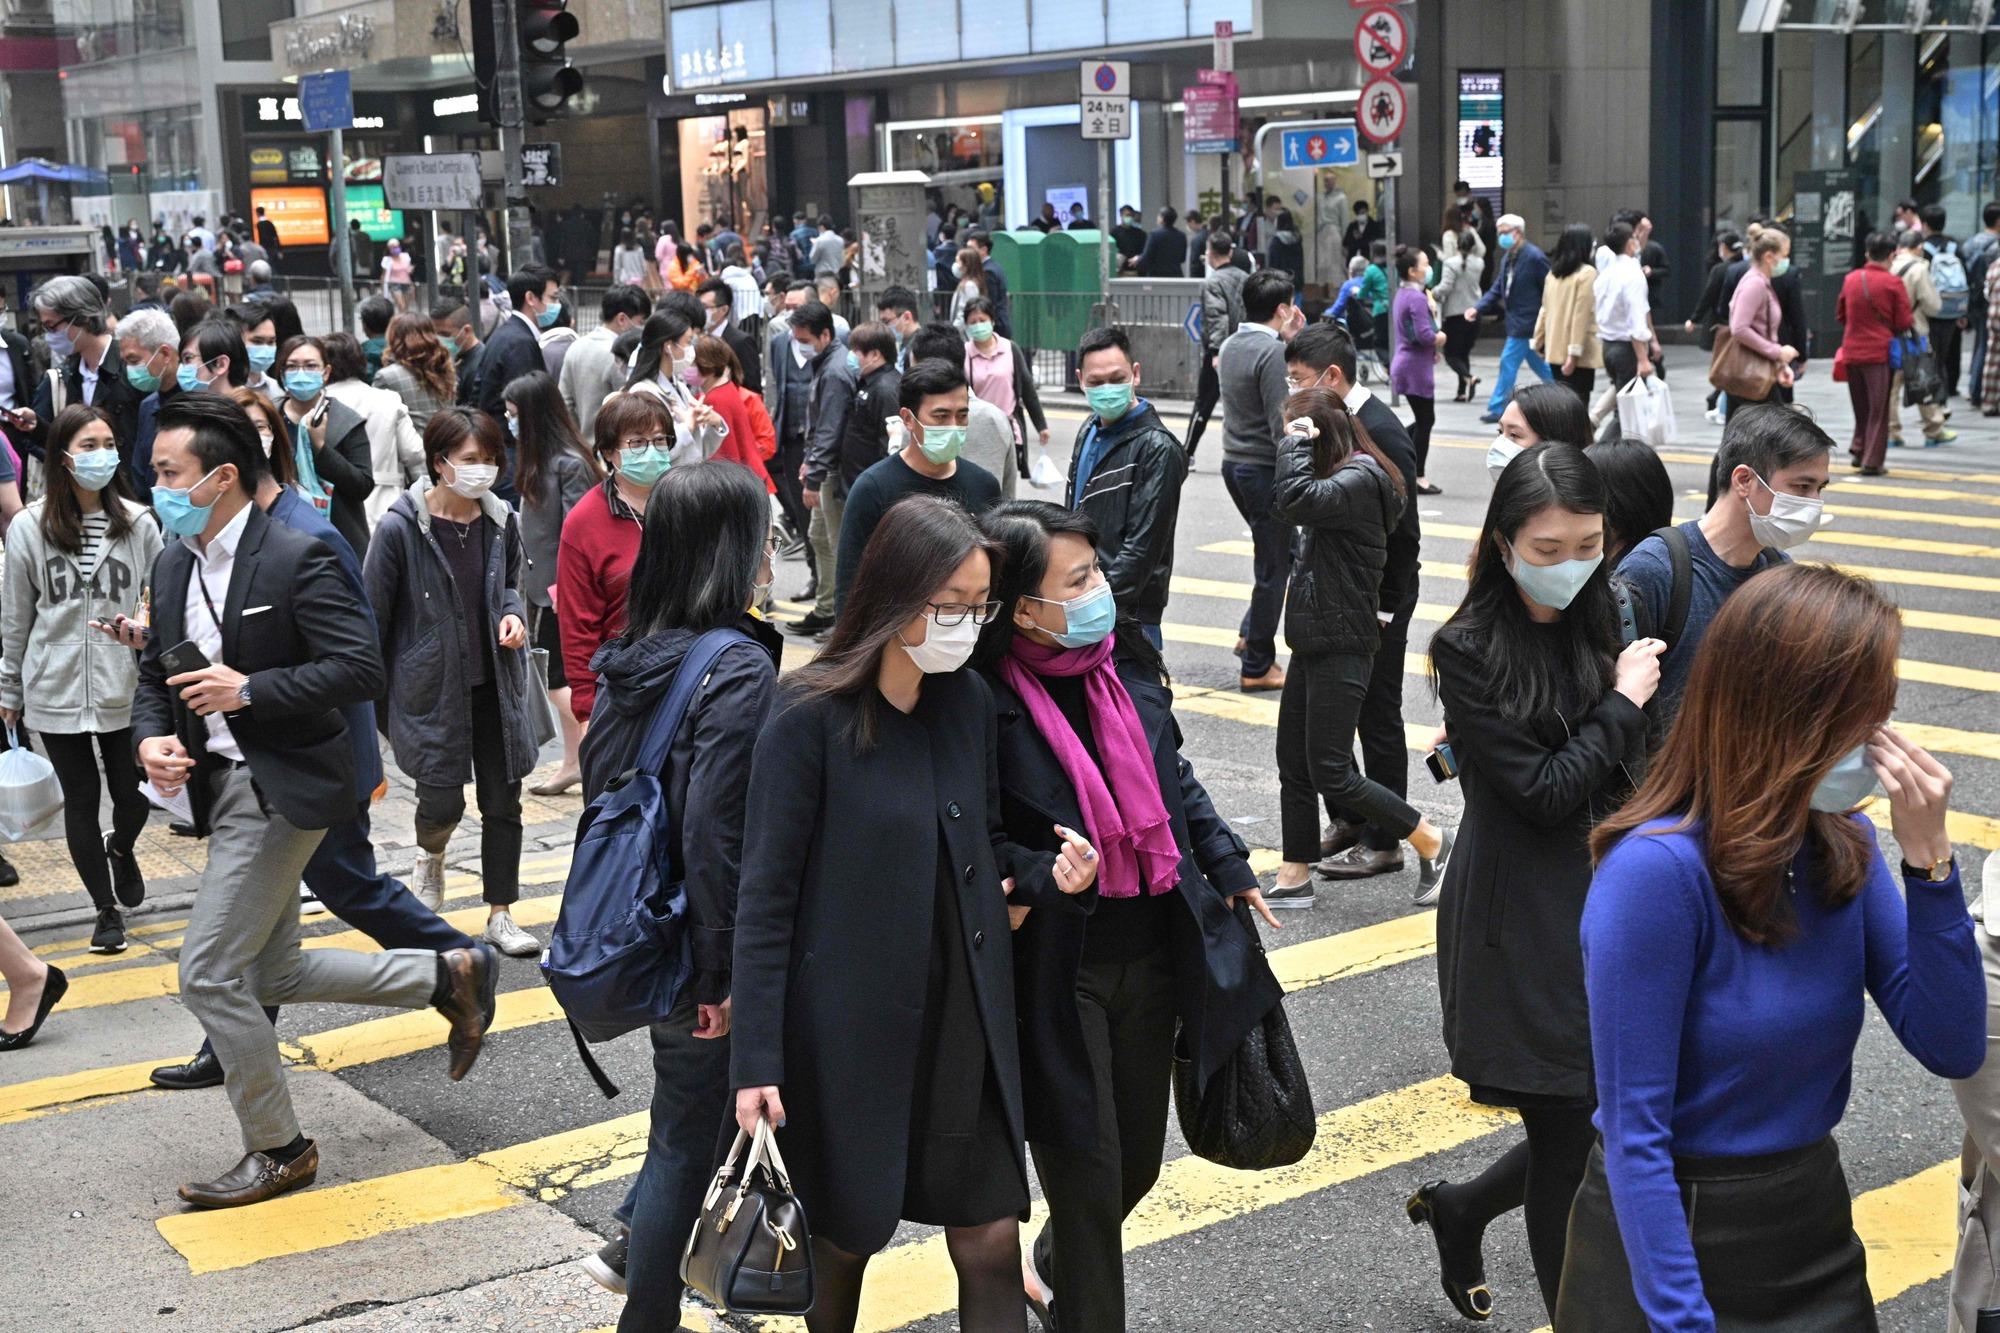 Pedestrians wear face masks, as a precautionary measure against the COVID-19 coronavirus, in Hong Kong on March 12, 2020. (Photo by Anthony WALLACE / AFP)